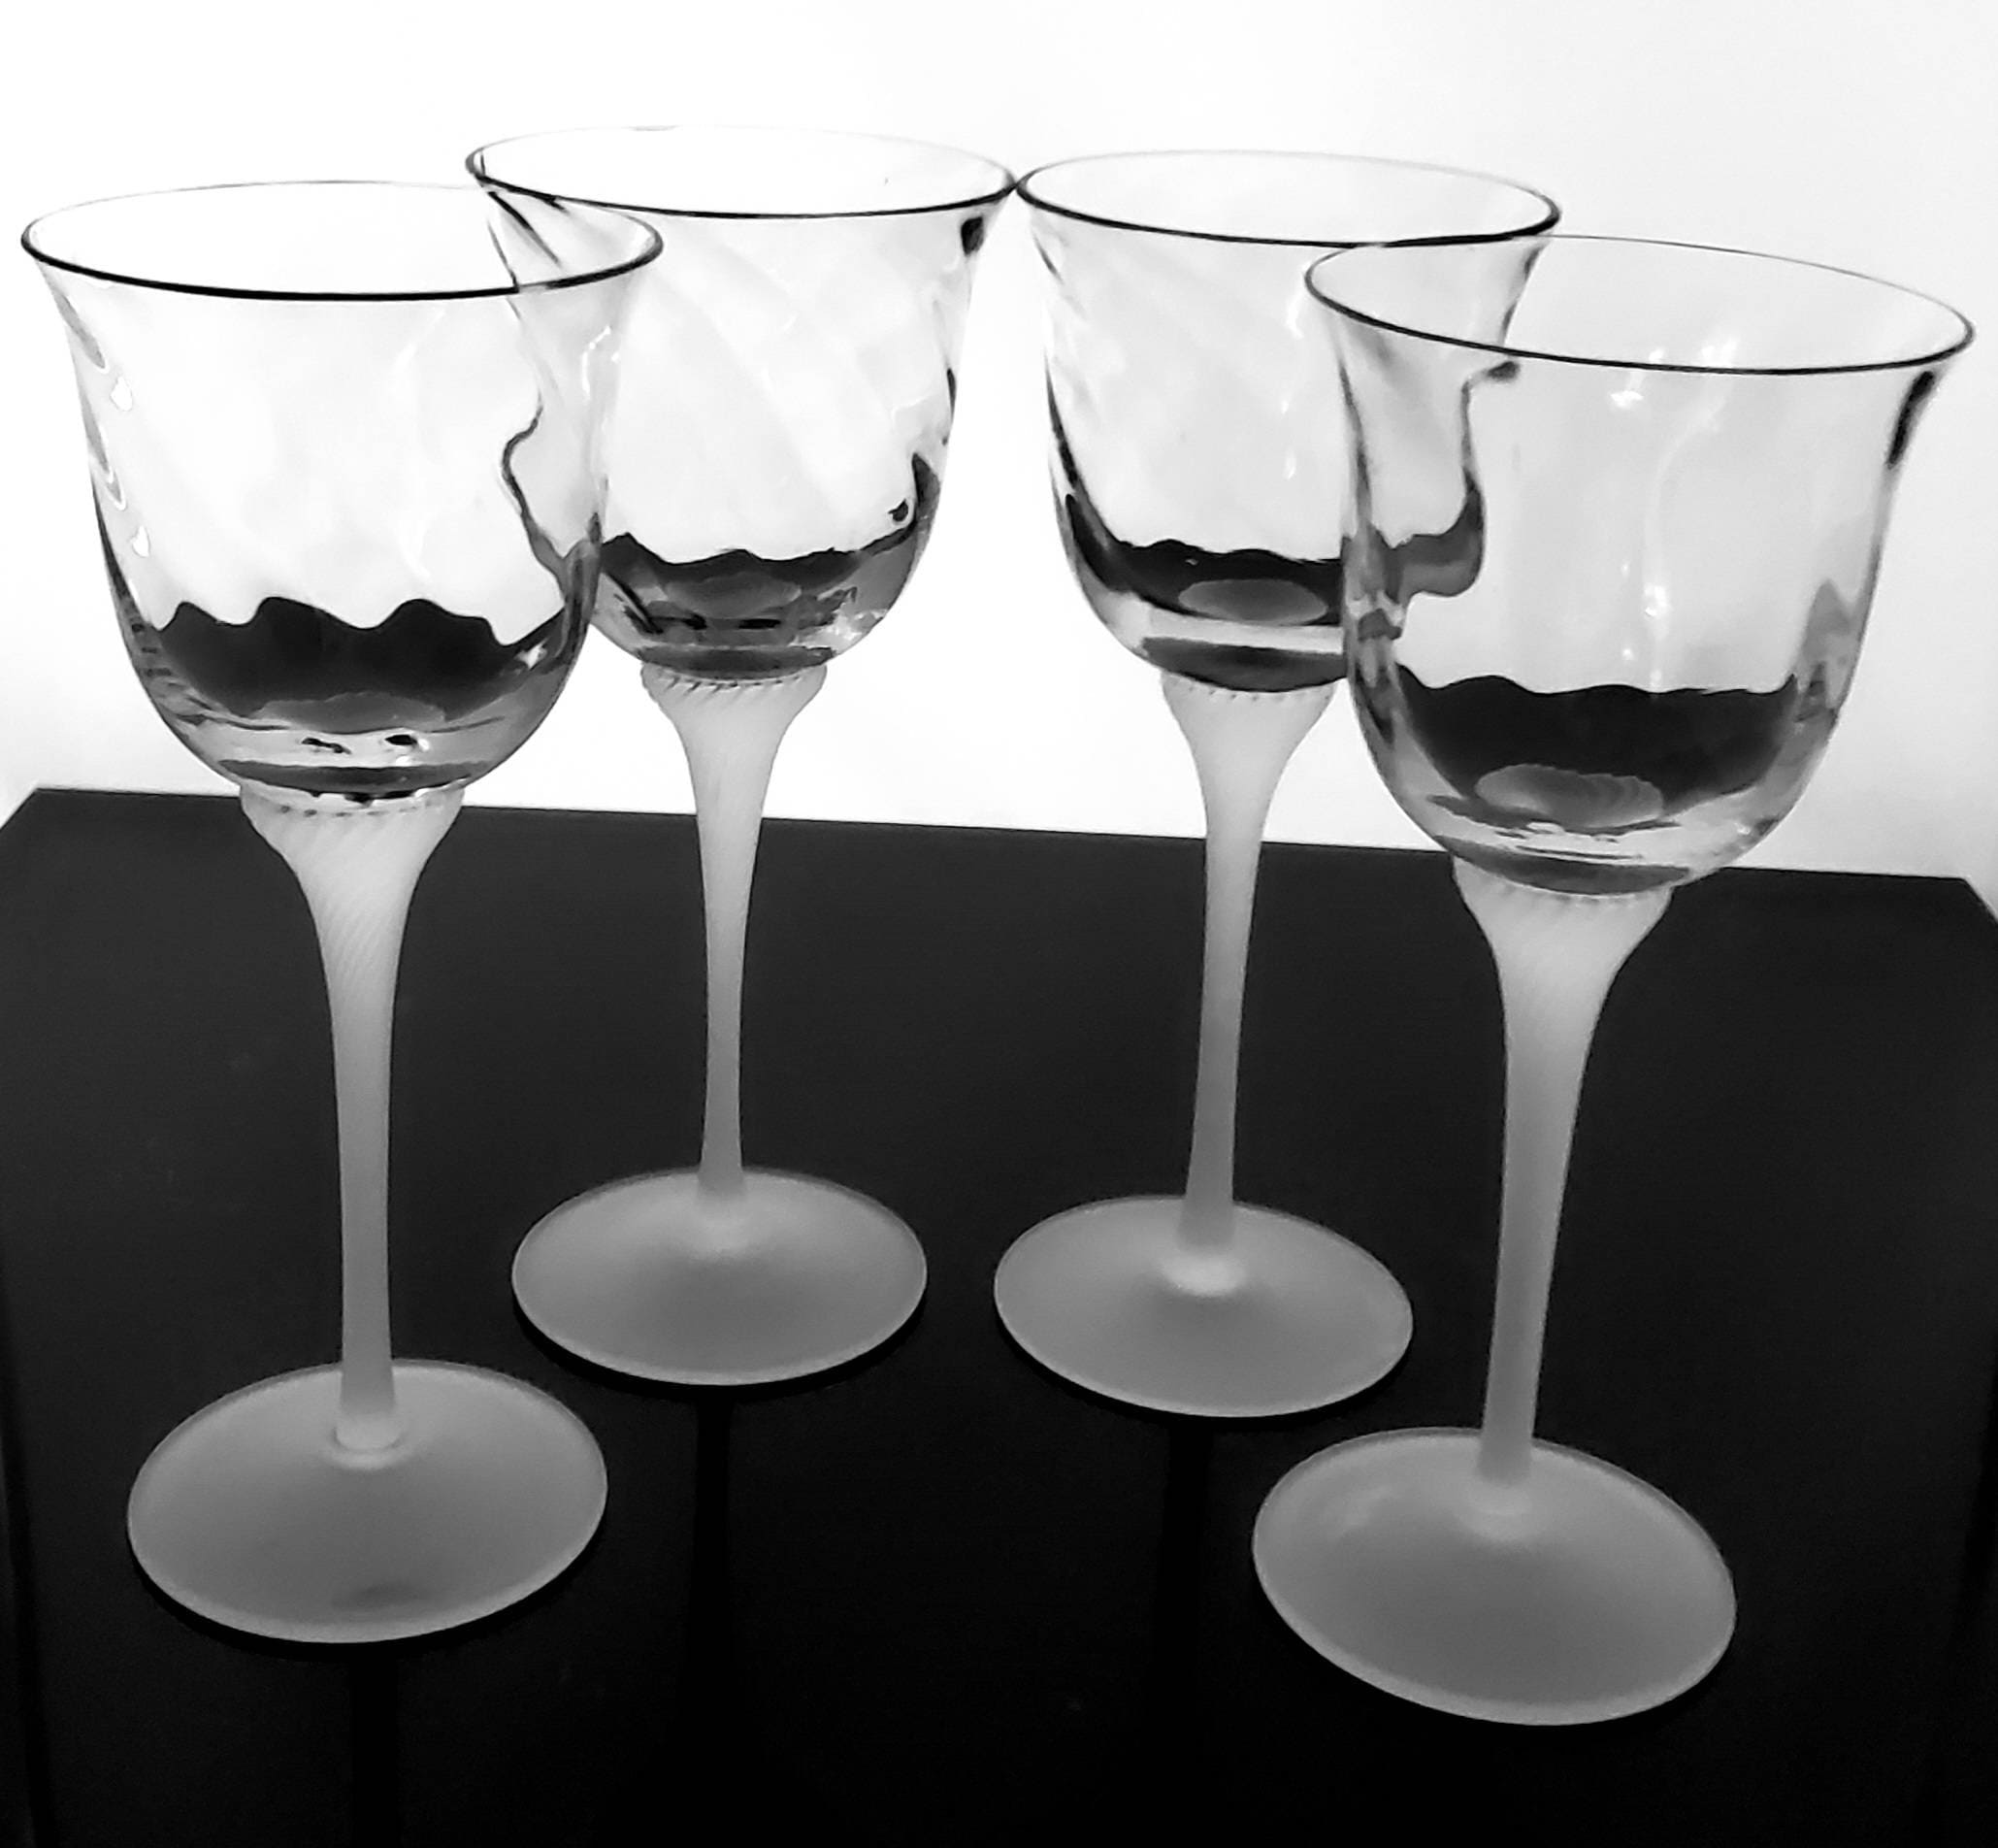 Luxbe Crystal Wine Large Glasses, Set of 4 Perfect for White, Red